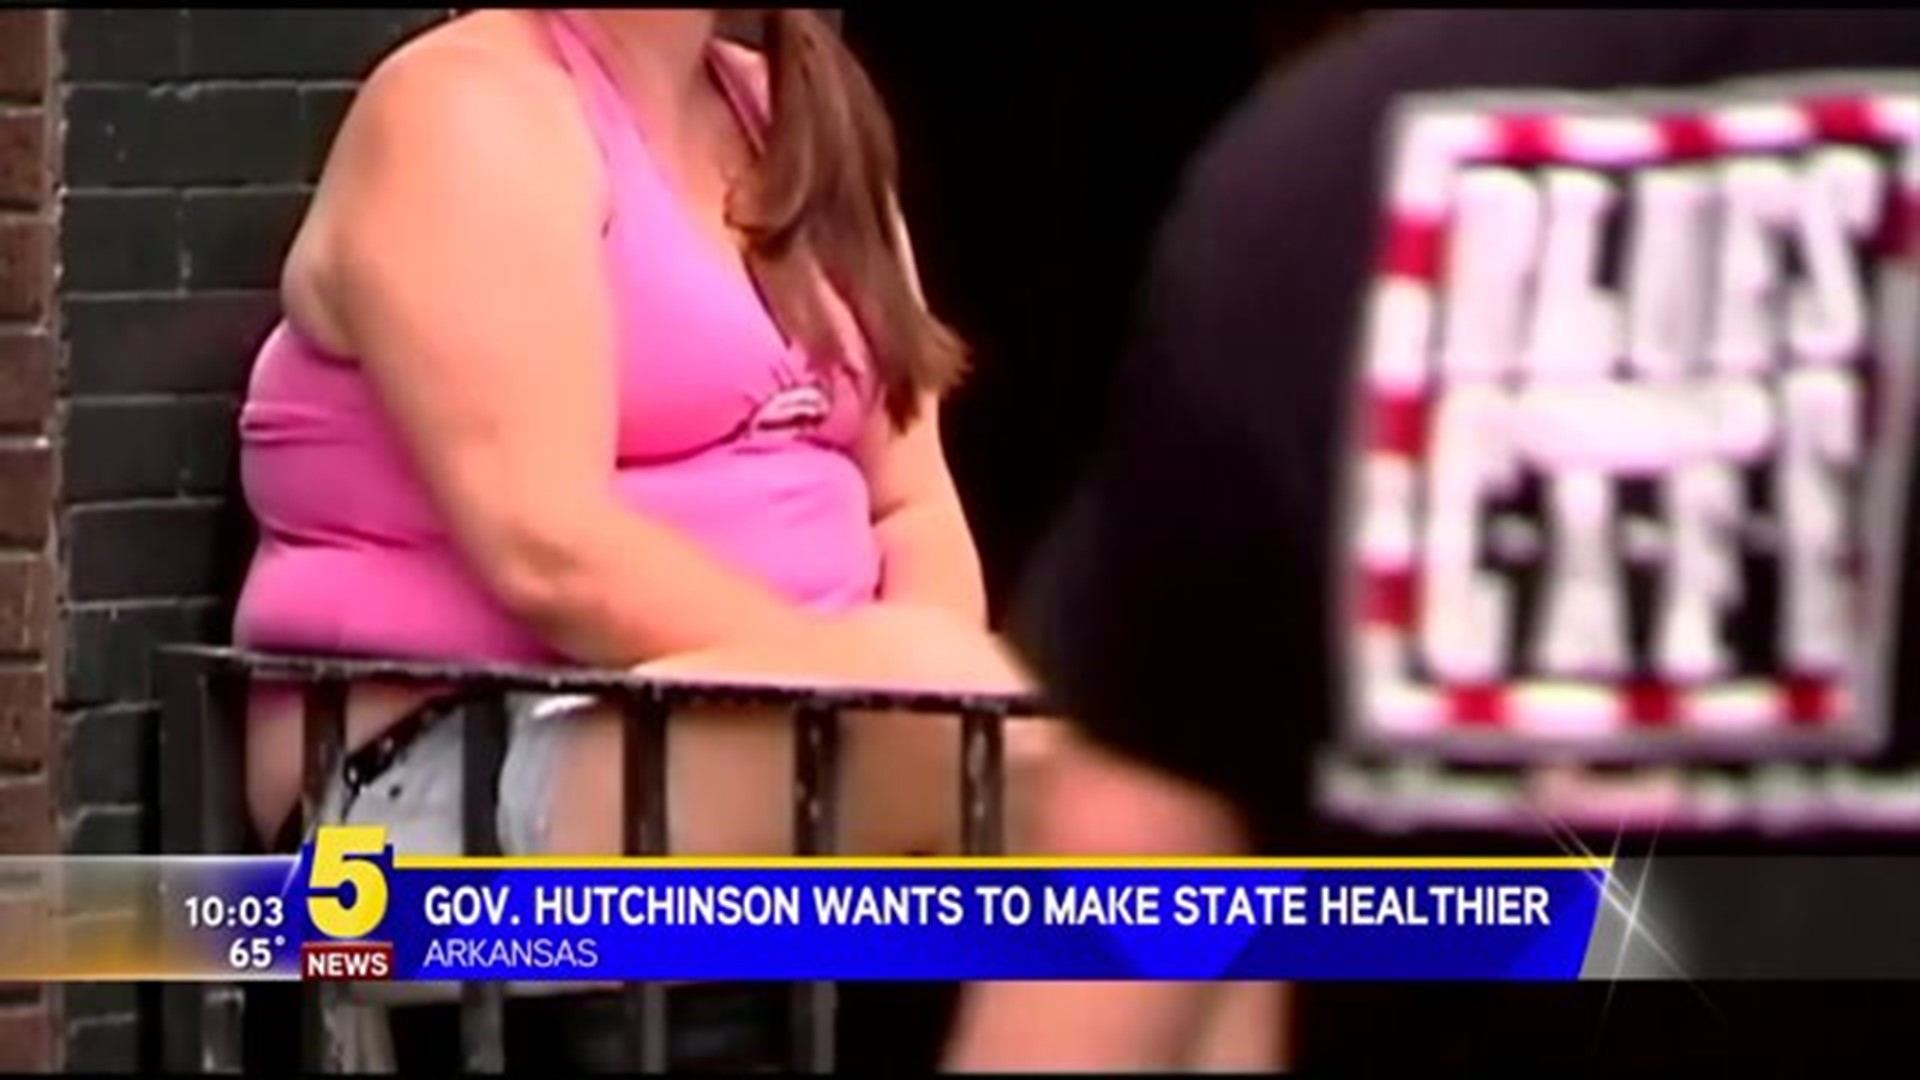 GOV WANTS TO MAKE STATE HEALTHIER